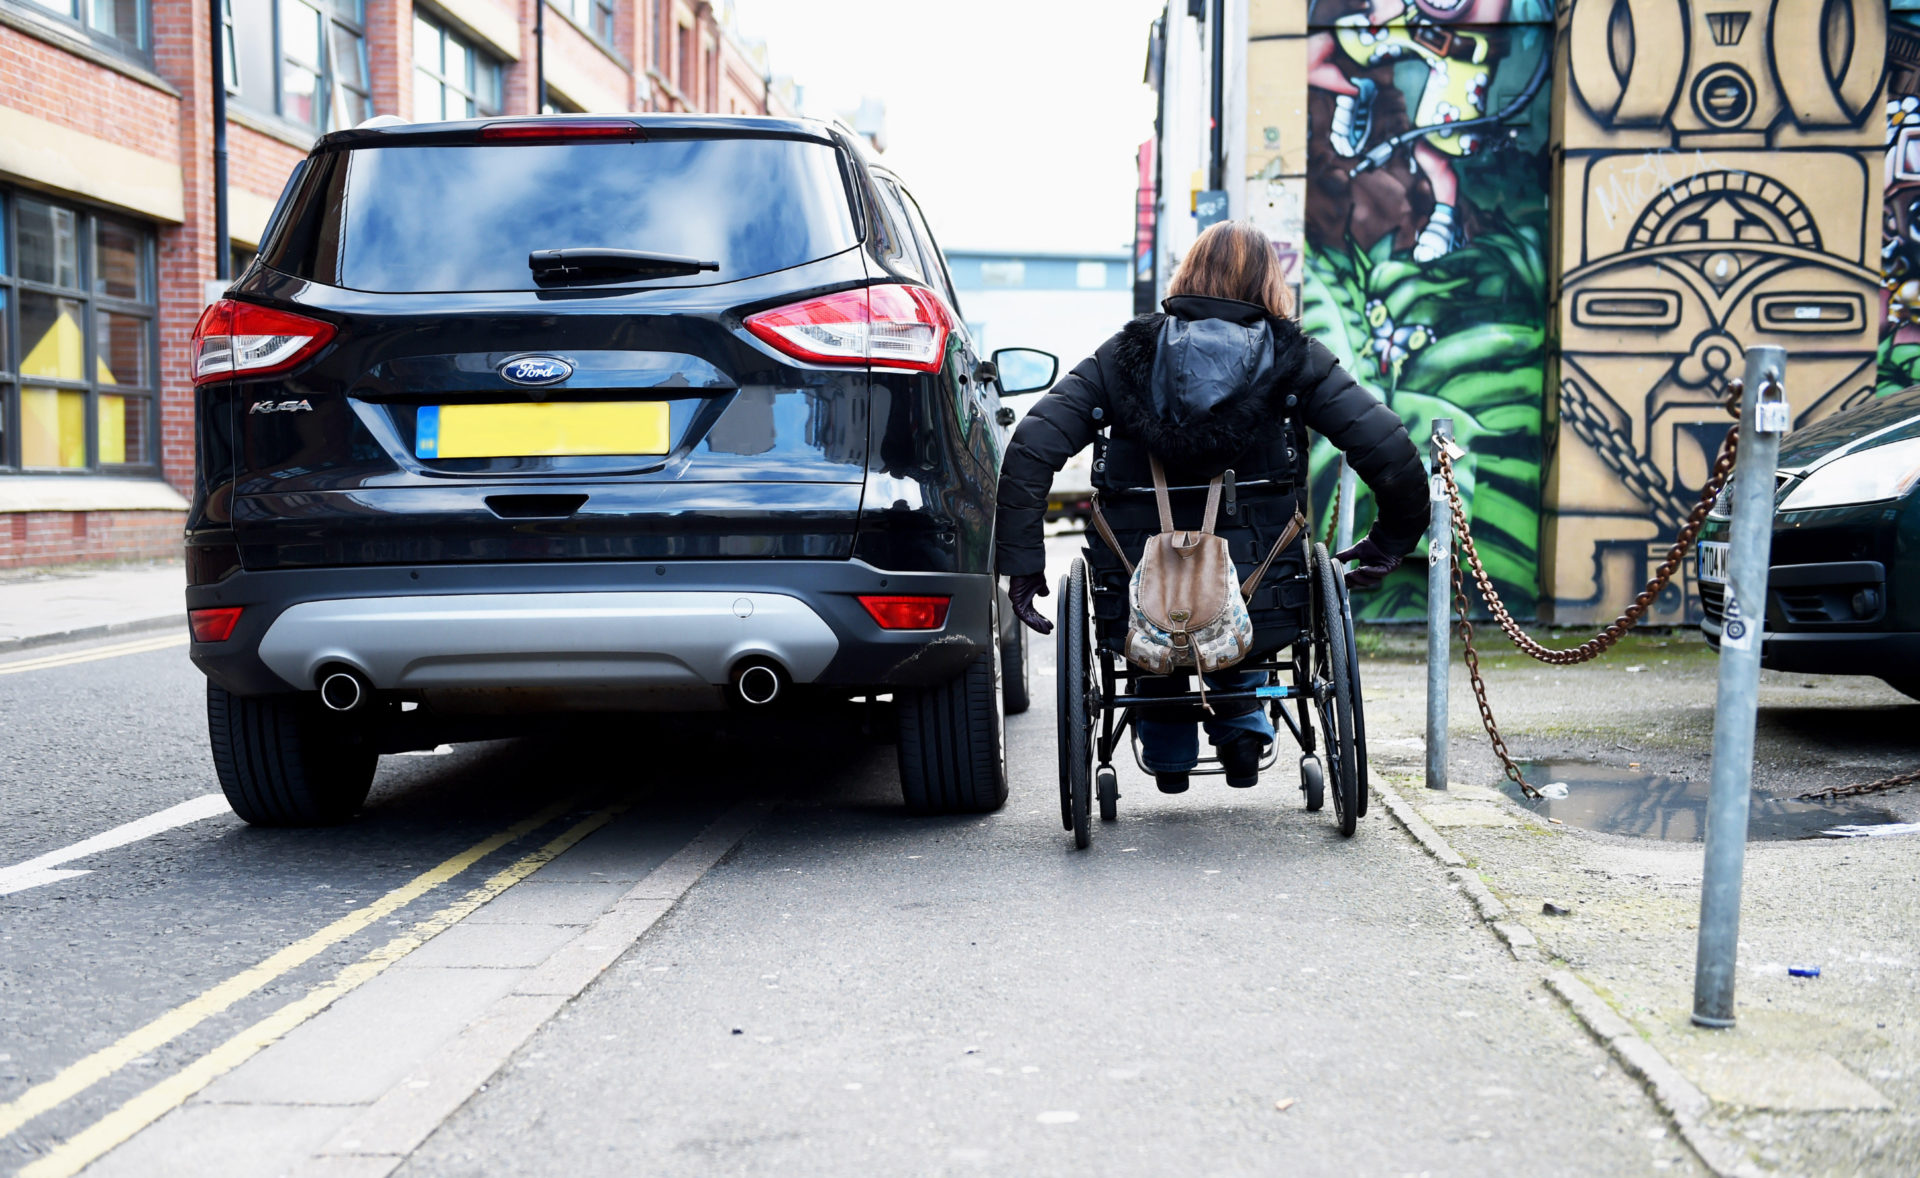 Wheelchair user struggles to pass by badly parked car on pavement and double yellow lines in Brighton UK, 11-02-2016.